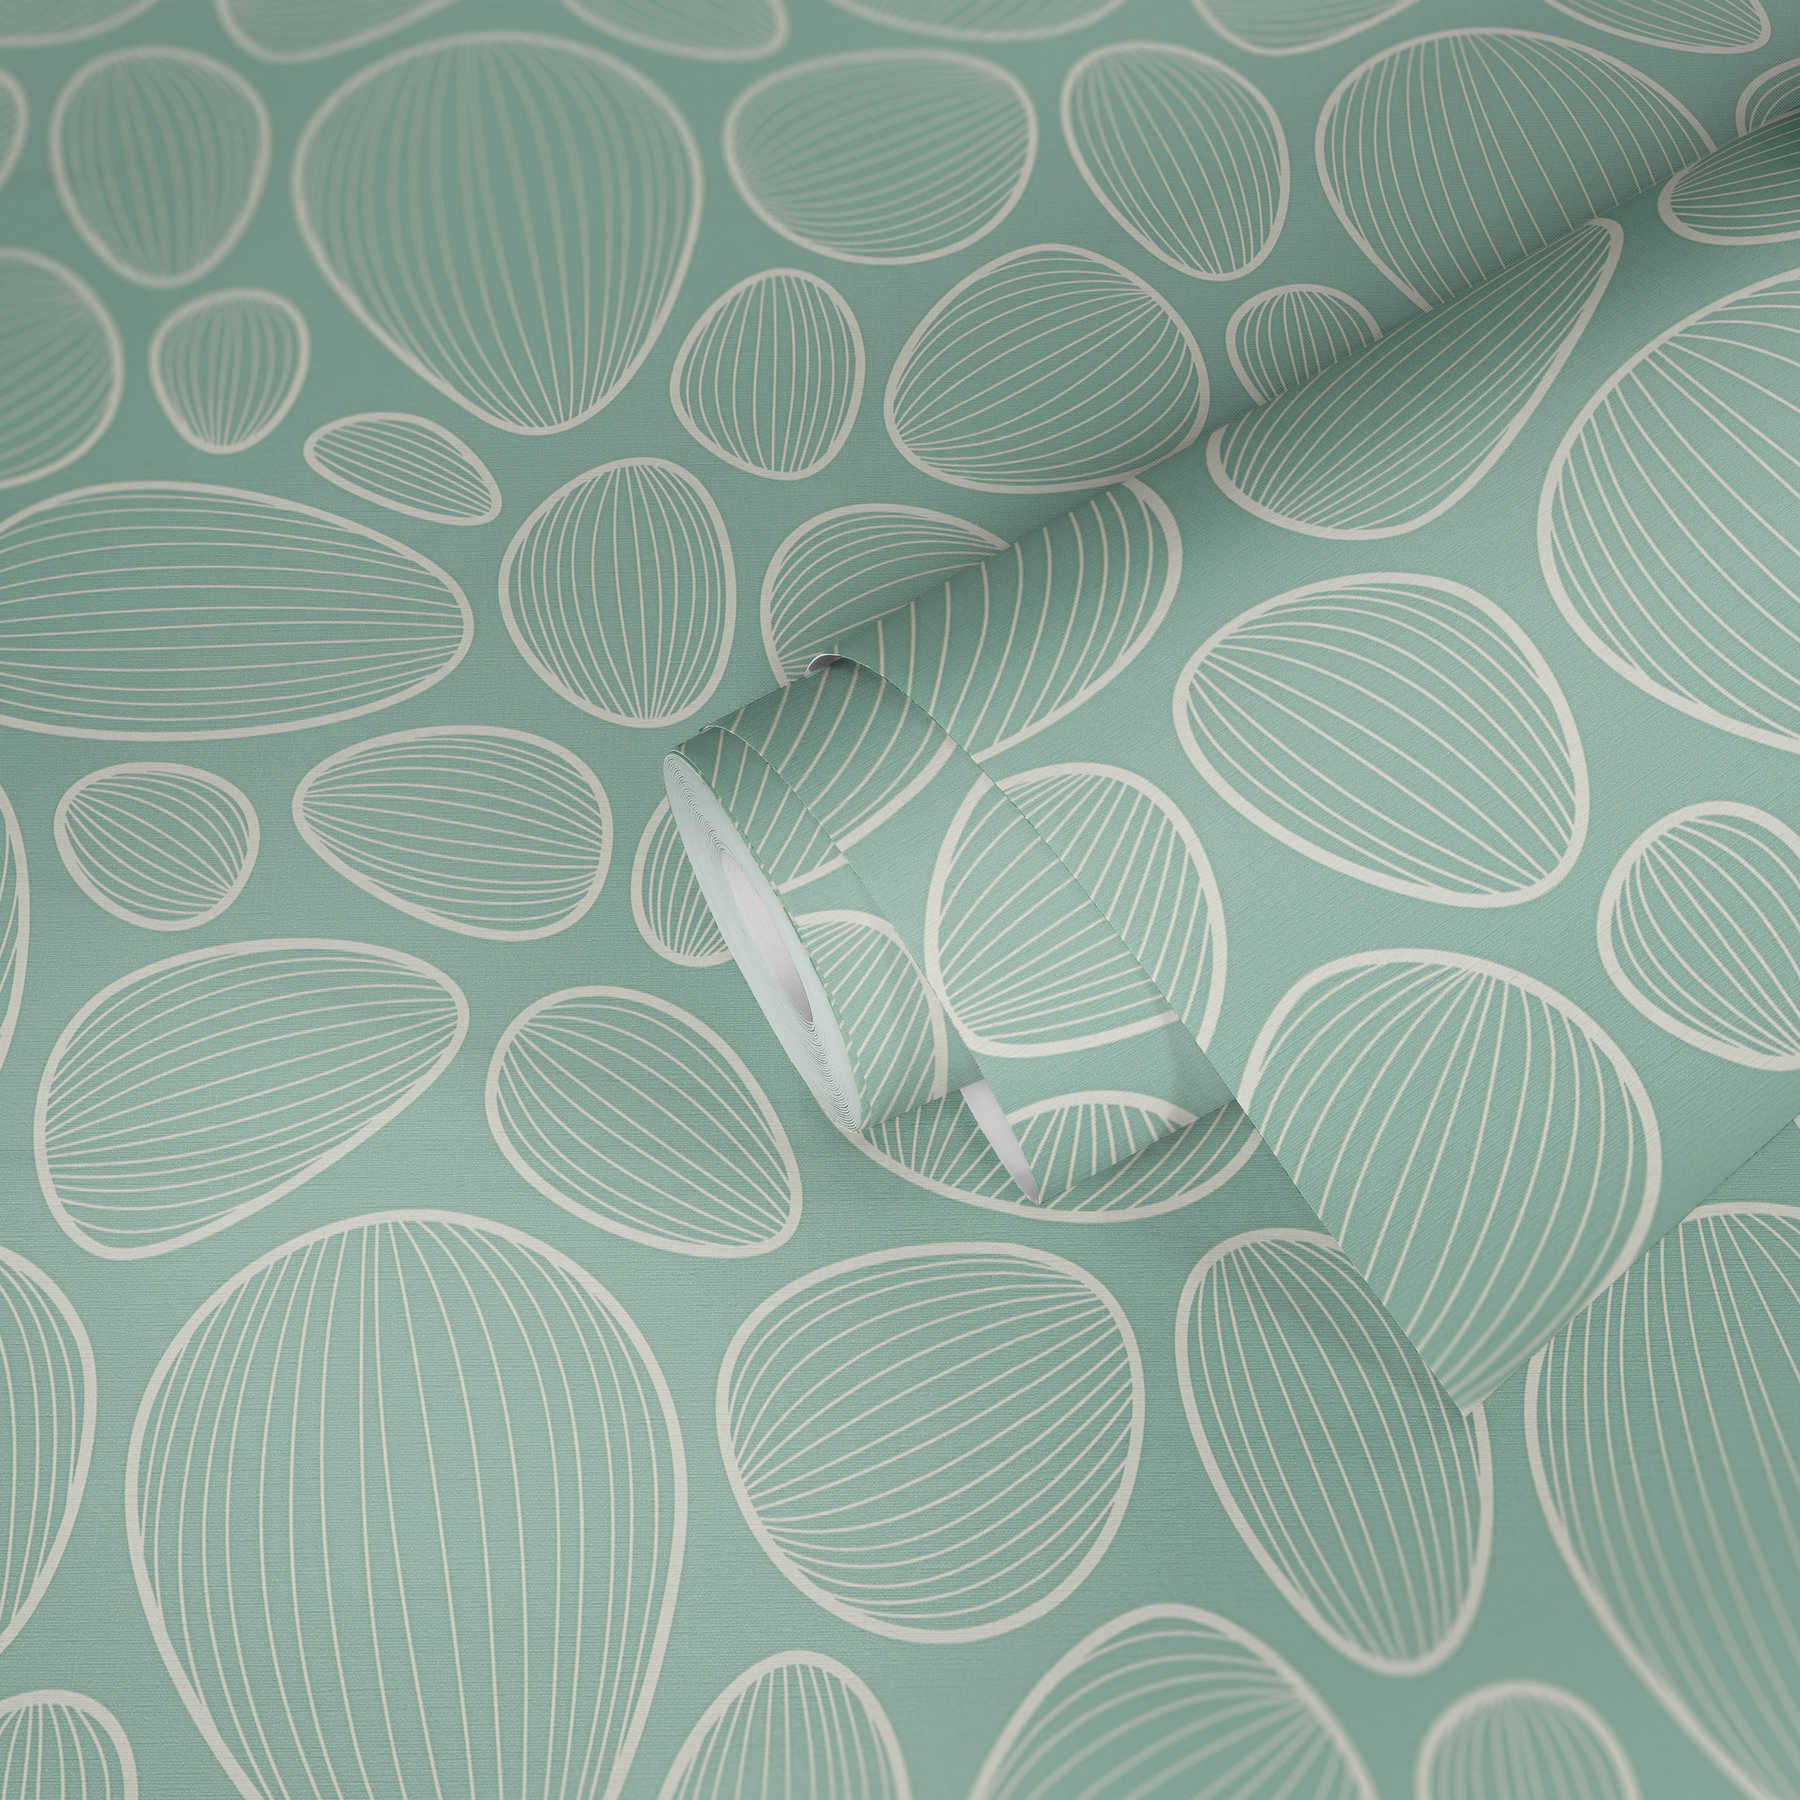             70s retro design wallpaper in mint green with textured pattern
        